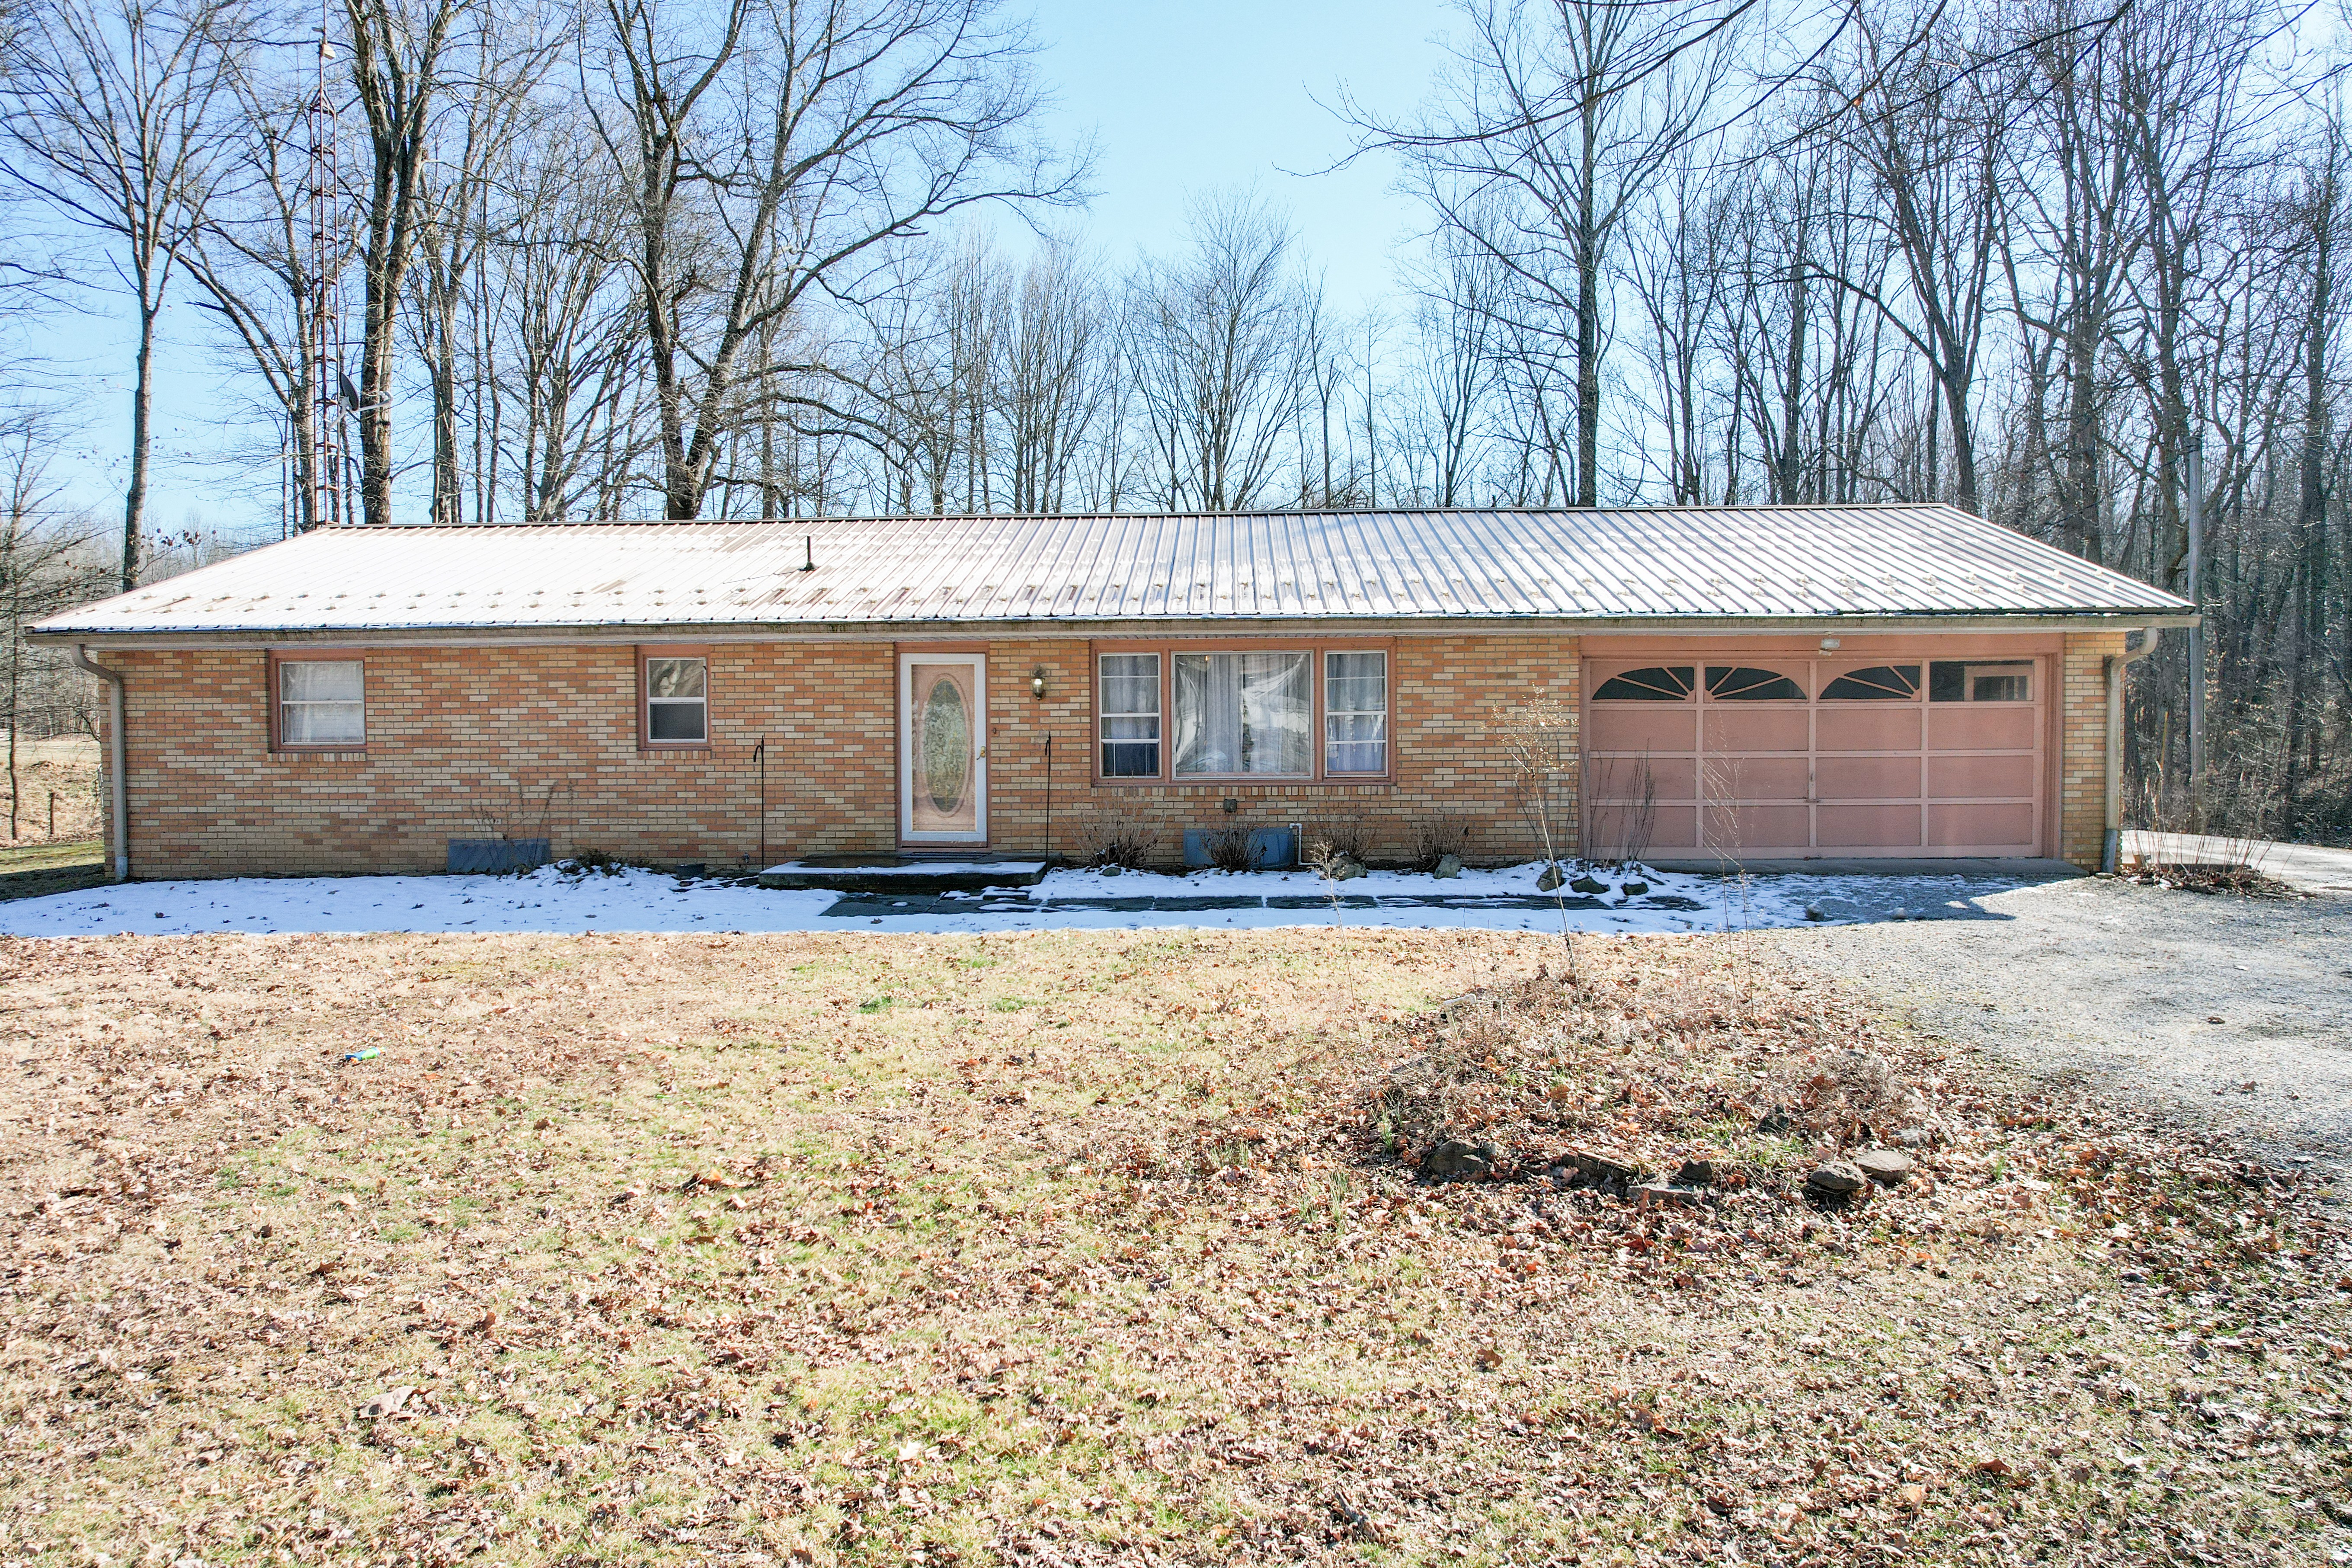 2845 E. County Road 500 S., North Vernon, Indiana, 47265, United States, 3 Bedrooms Bedrooms, ,2 BathroomsBathrooms,Residential,For Sale,2845 E. County Road 500 S.,1478539